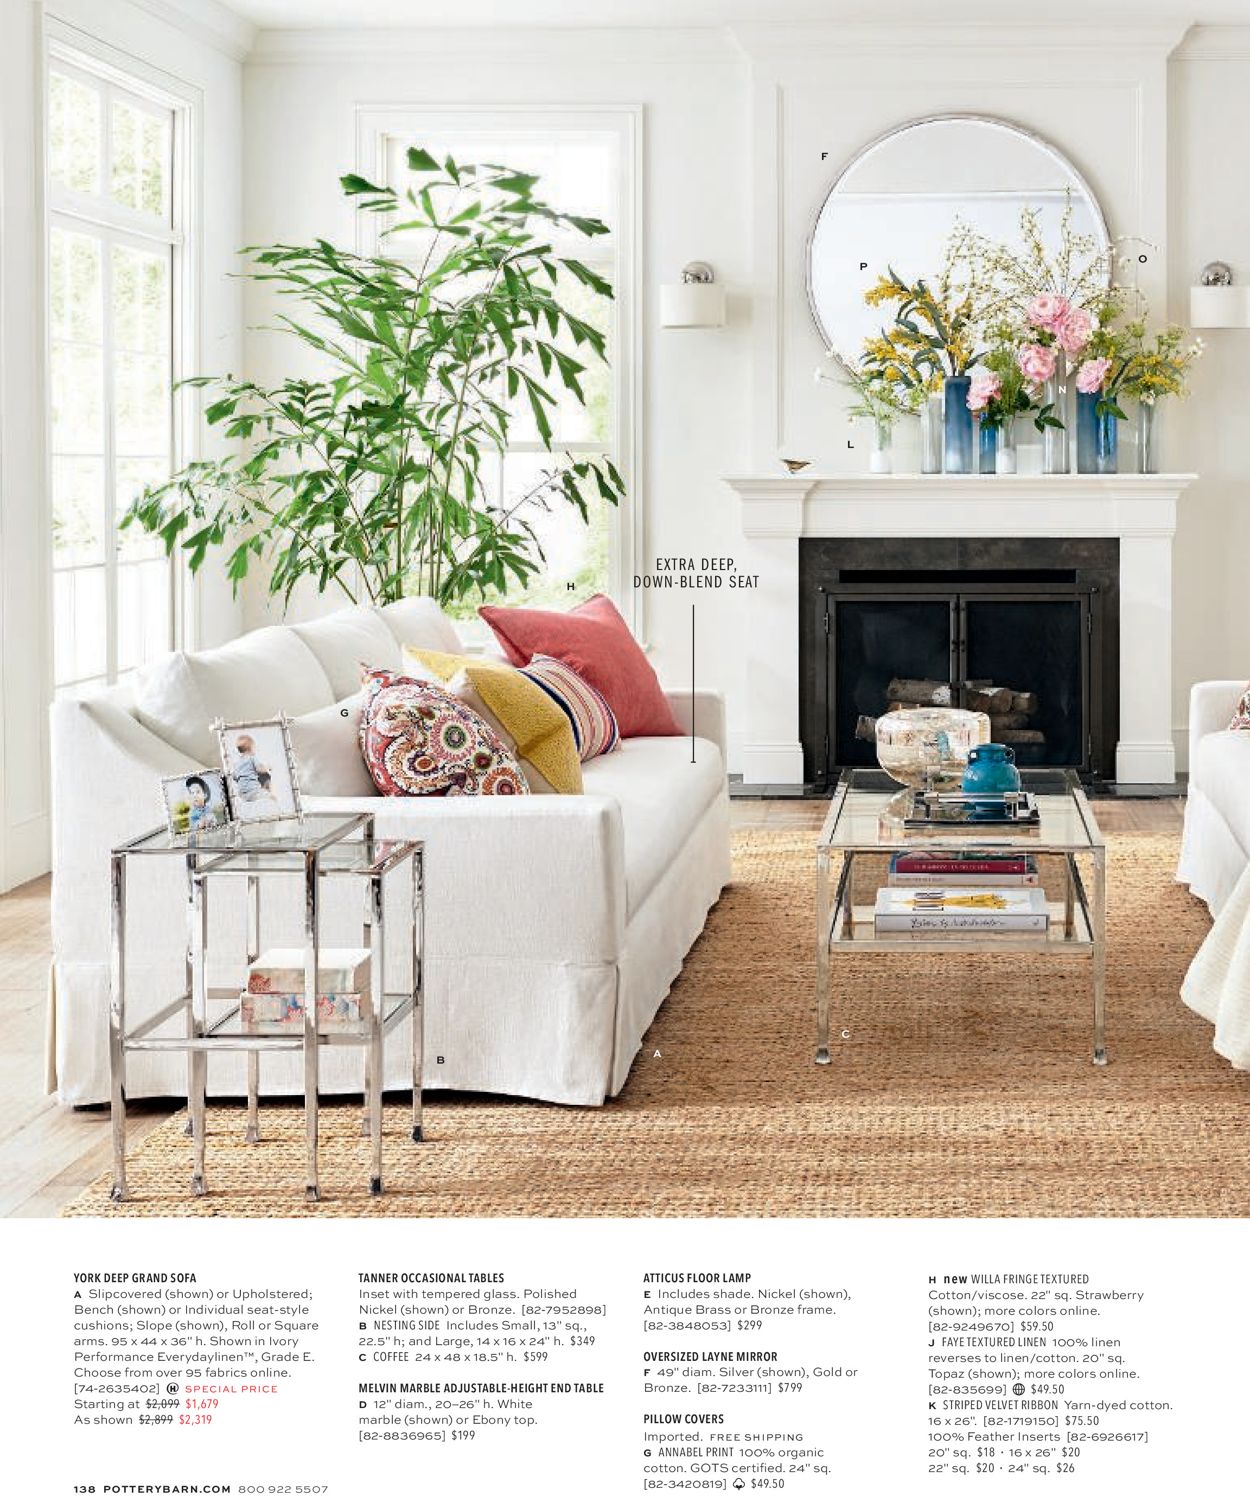 Pottery Barn Current weekly ad 01/08 03/01/2020 [138]